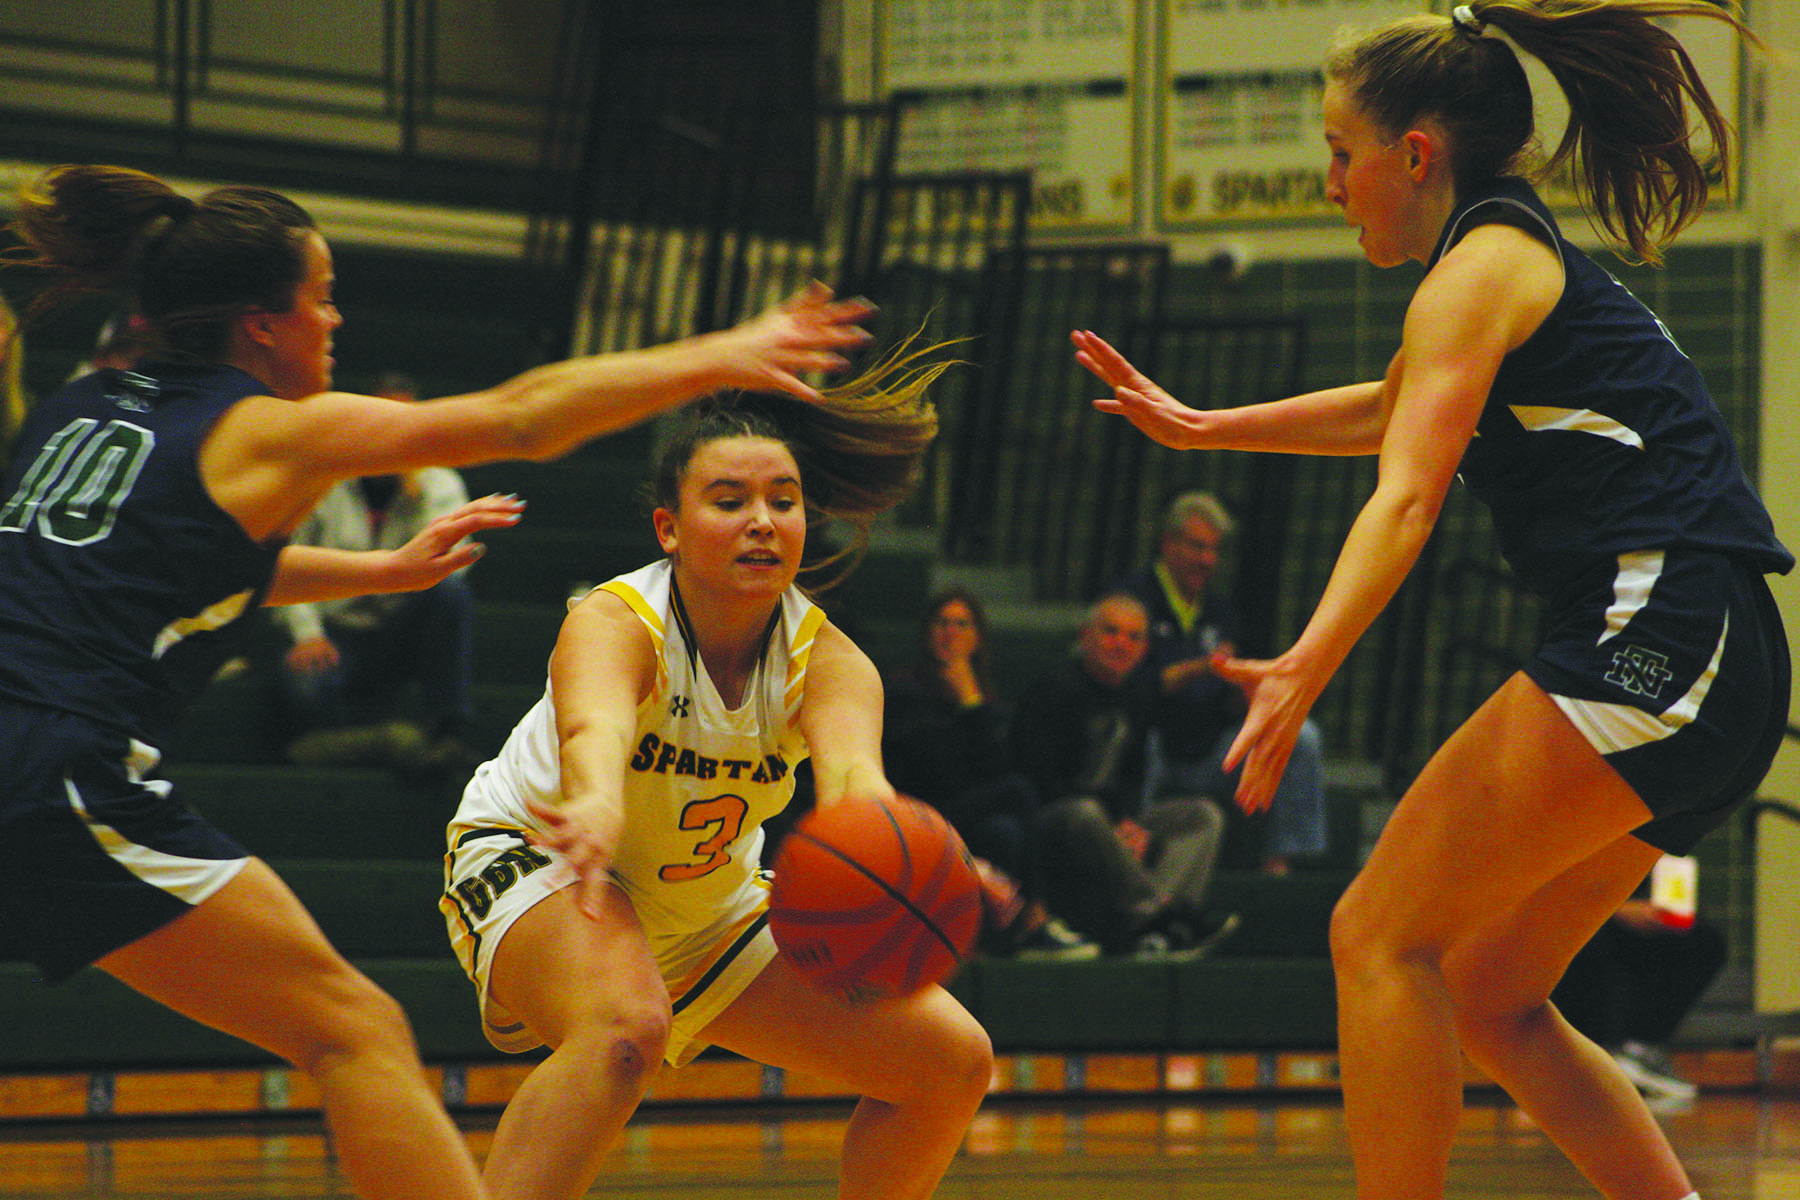 Junior Grace Gertner (middle) passes during a game against New Trier on Dec. 6. Glenbrook North won 54-40 and as of Dec. 8, the team has an overall record of 7-1 and 2-1 in conference. 